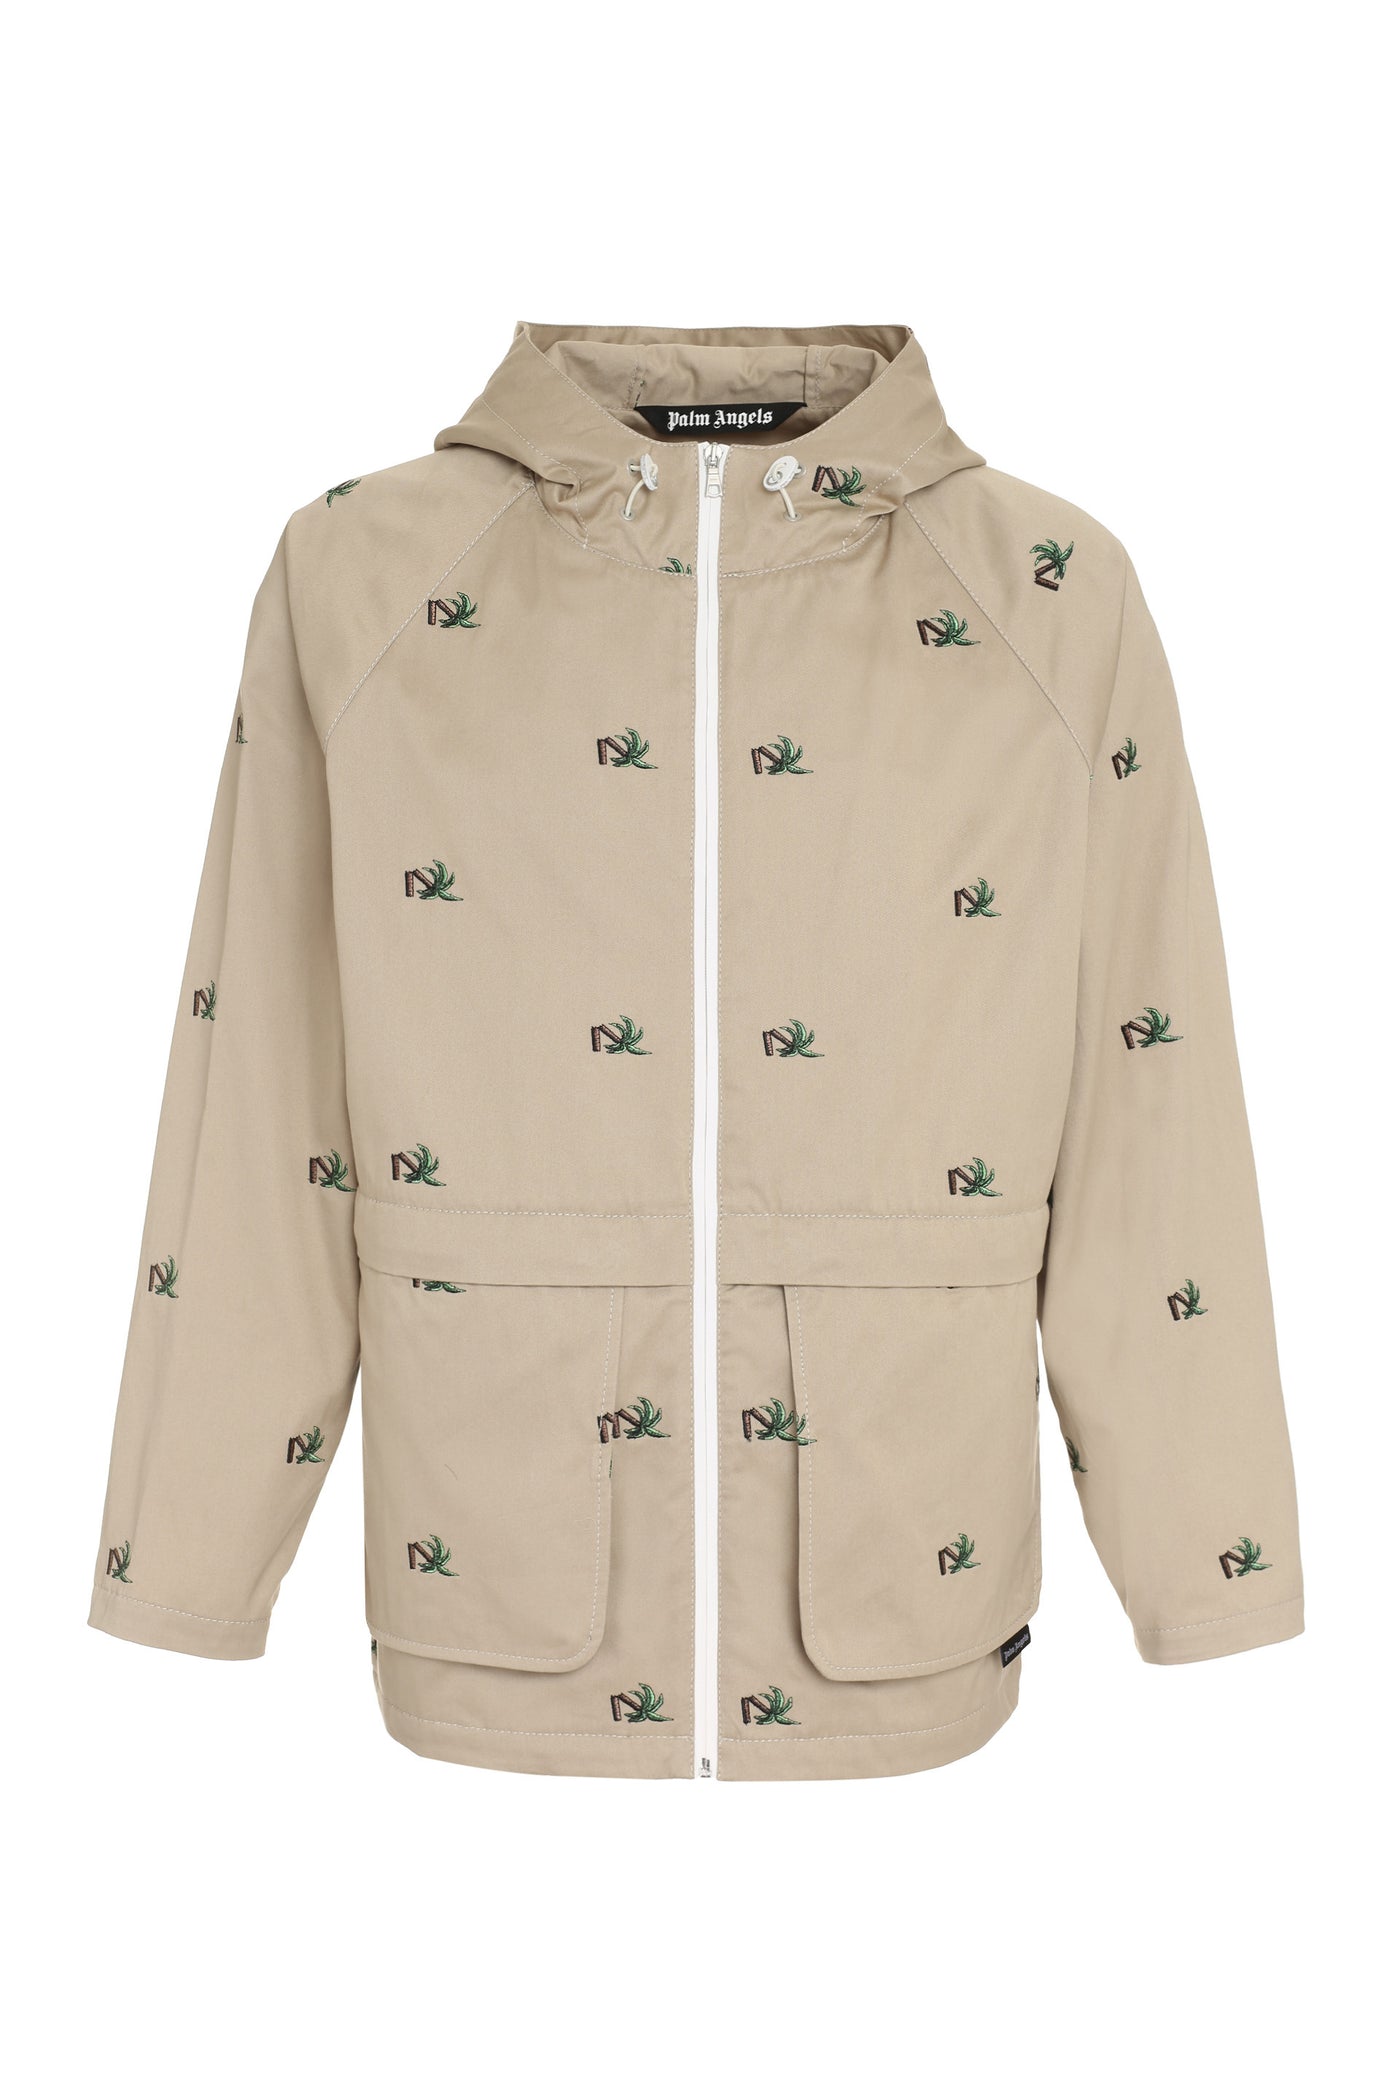 6155 PALM ANGELS HOODED COTTON PARKA